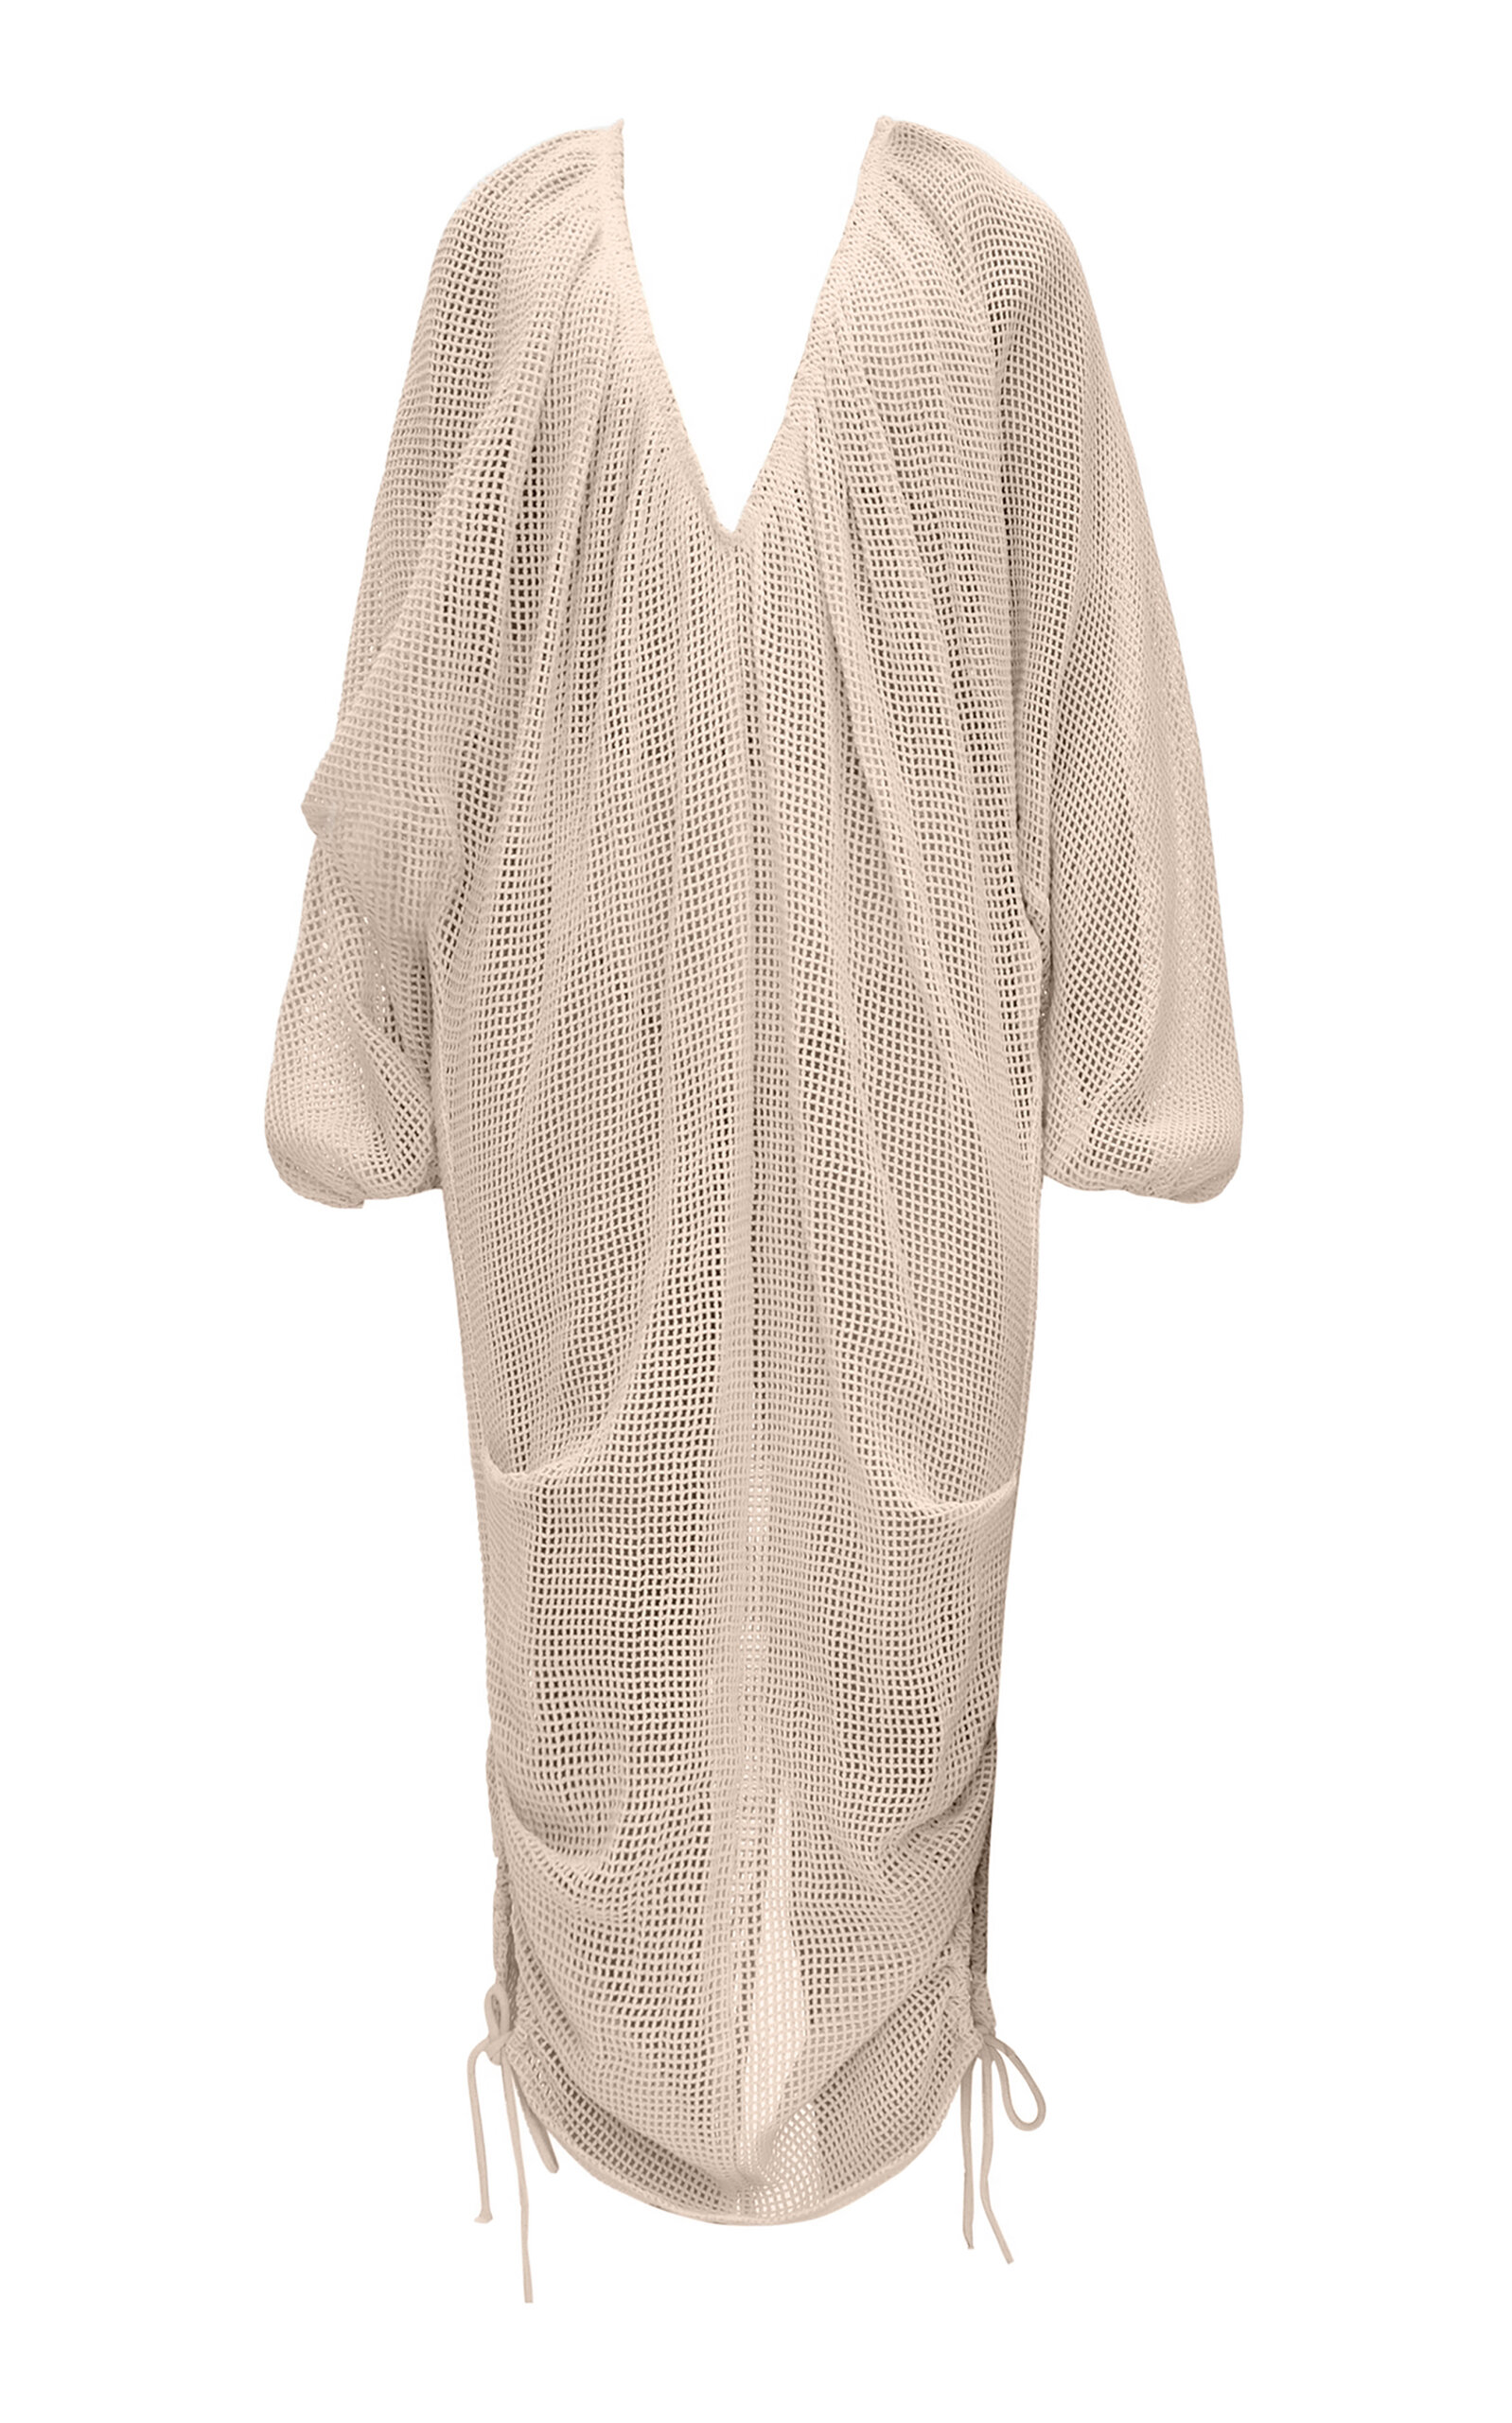 Meta Netted Cotton Cover-Up